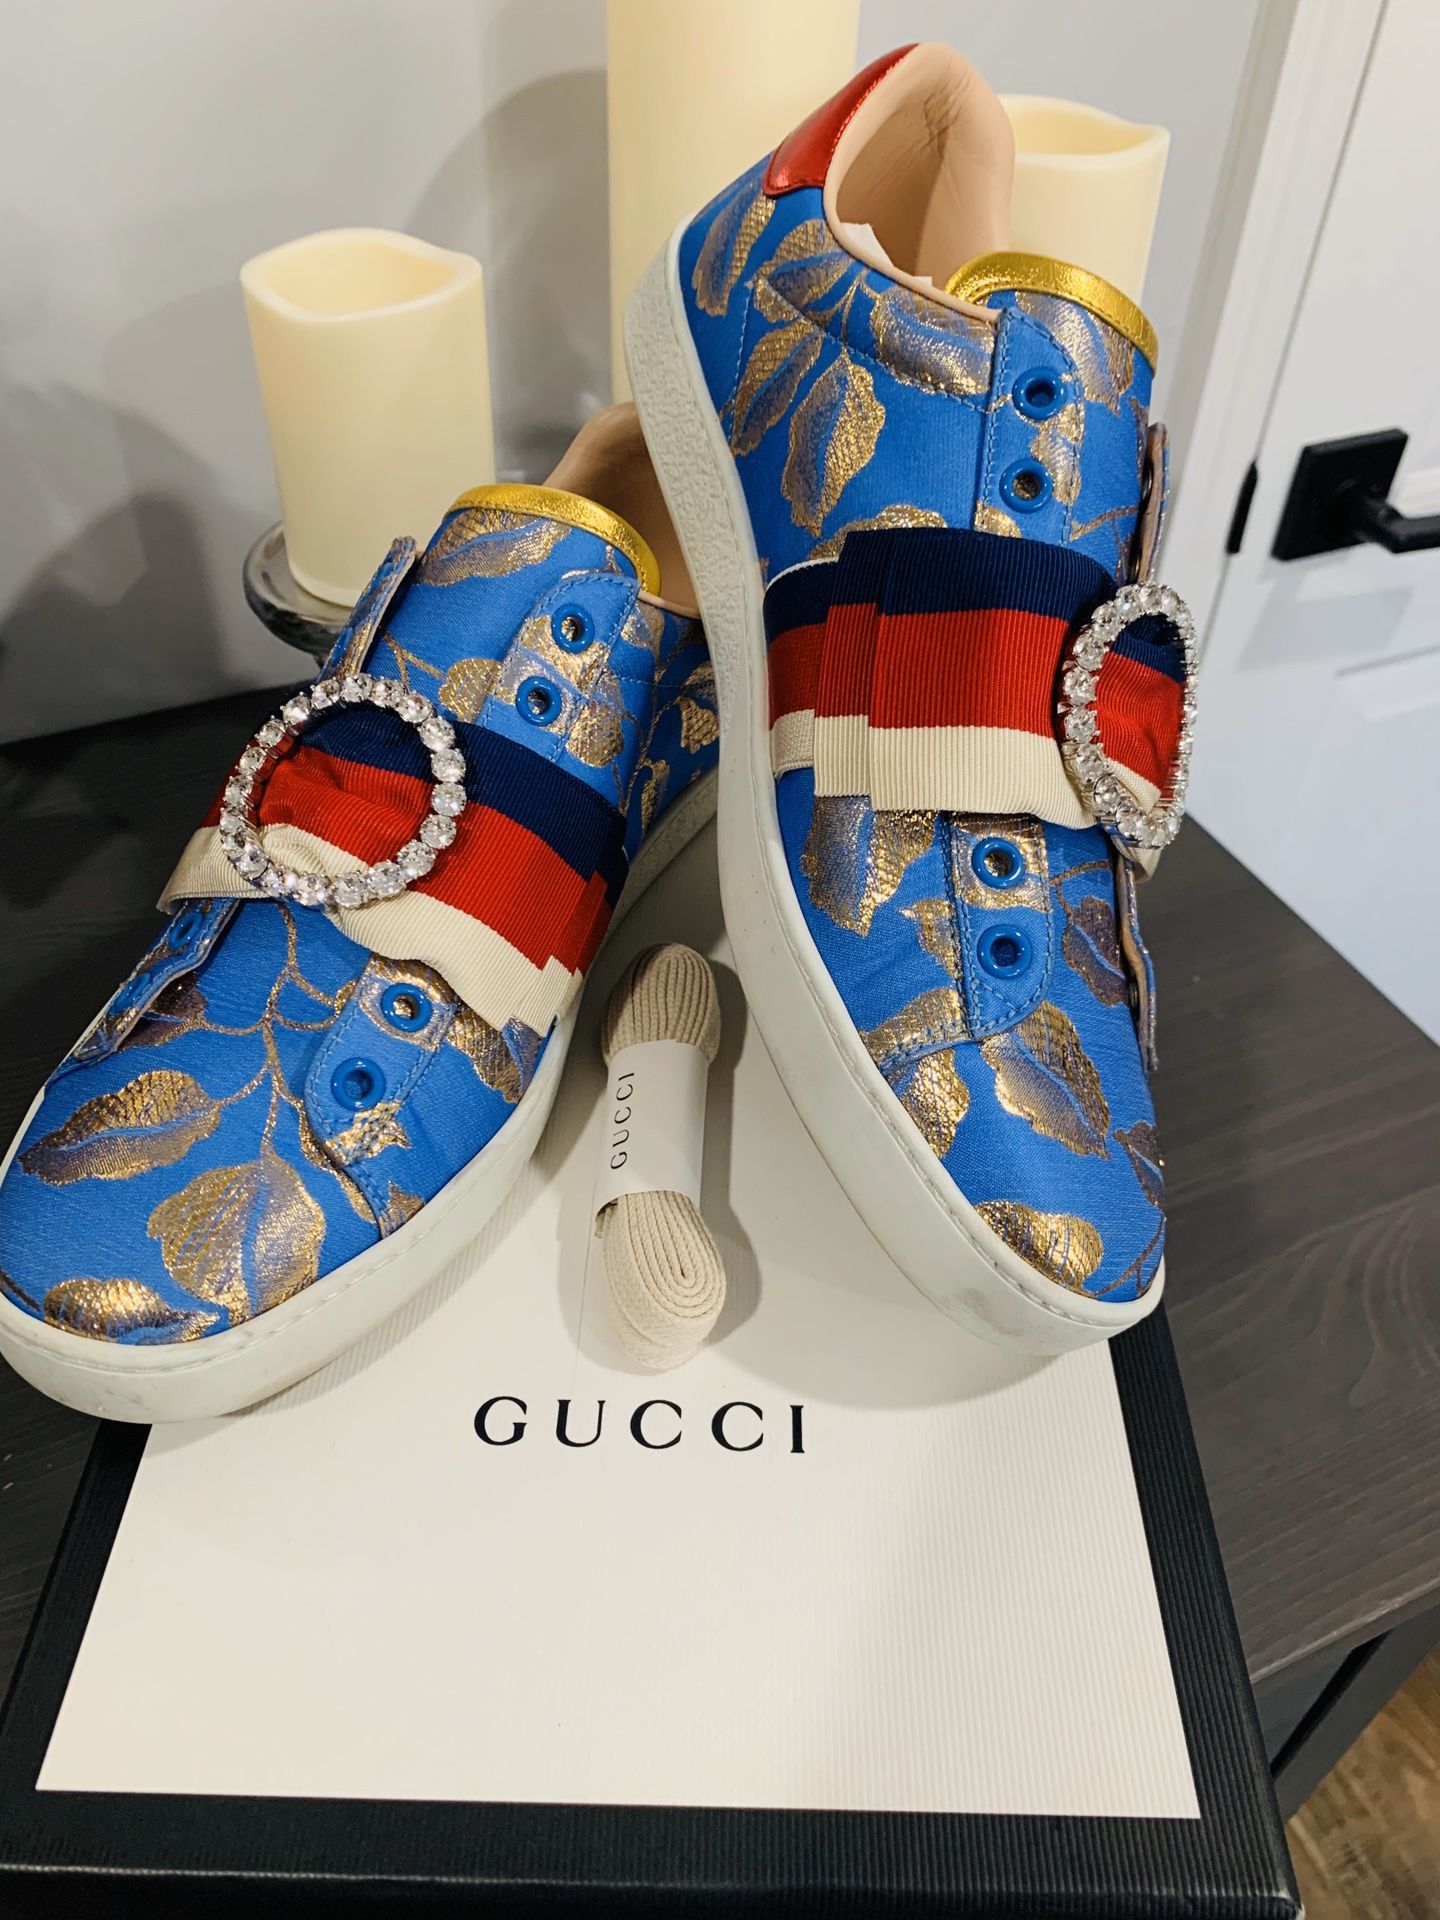 Gucci Ace Sylvie Bow Slip on Speakers Size 39 (8-9)